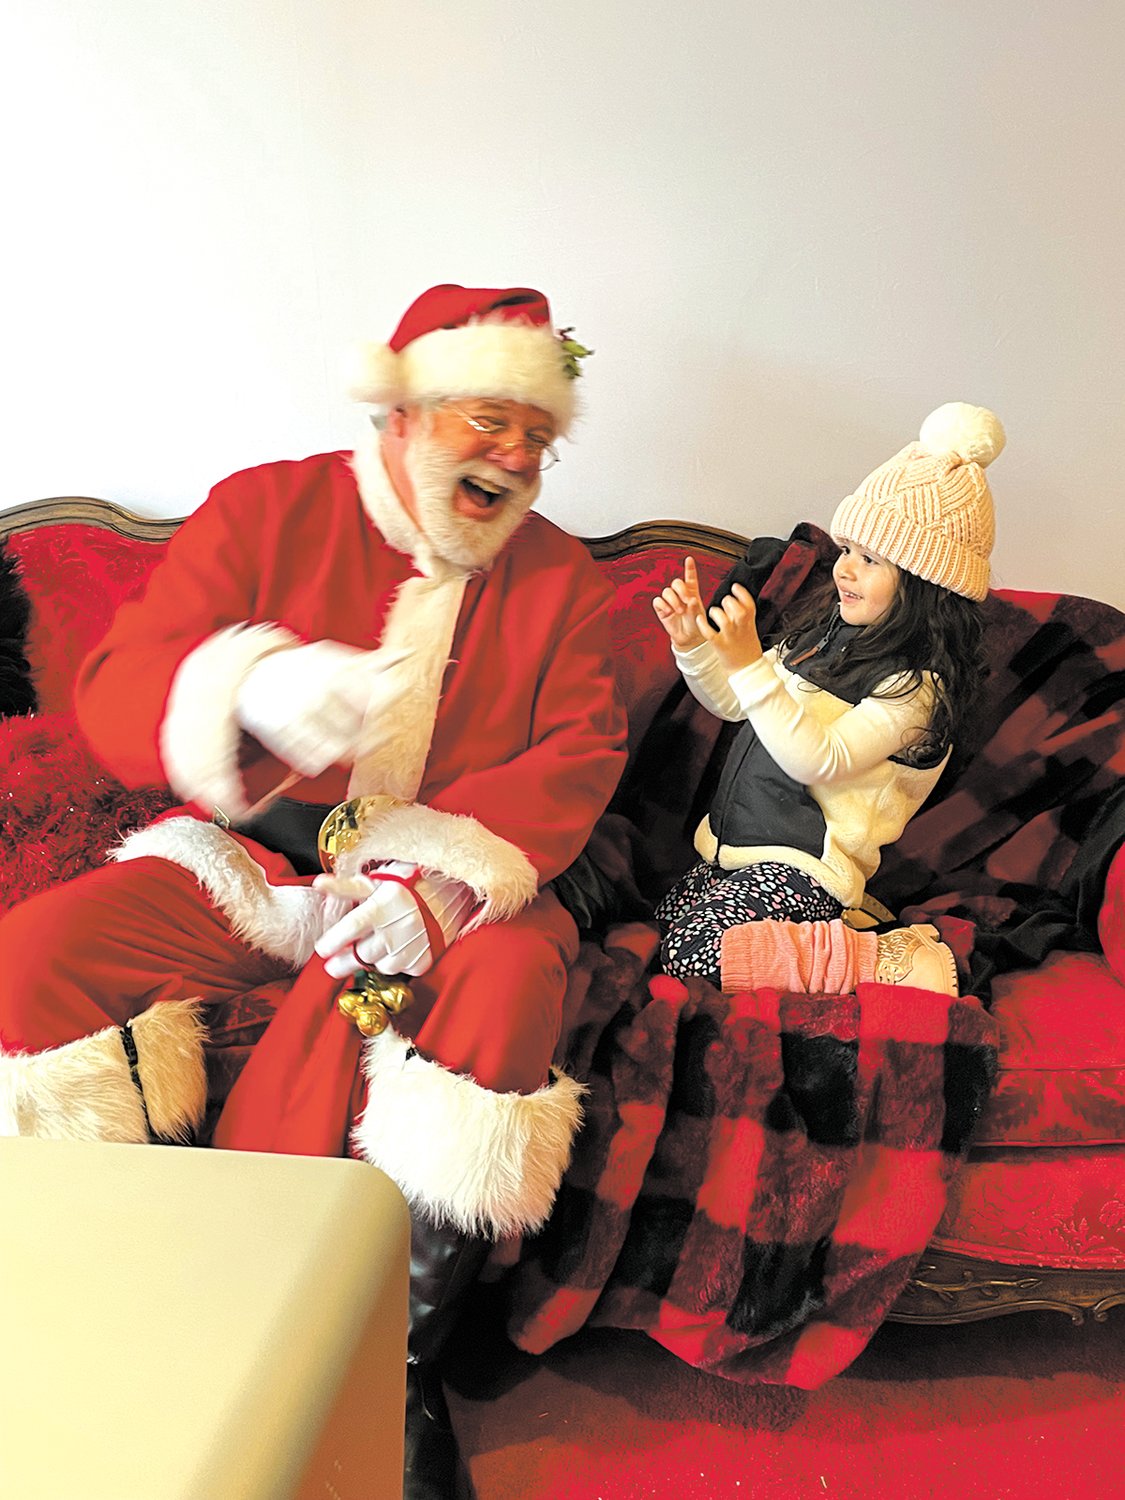 THE MAGIC IS REAL: Santa certainly was amused by his little visitor, Ella Villaman at the “Cops and Kids Holiday Party” at the Park Theatre on Dec. 3.